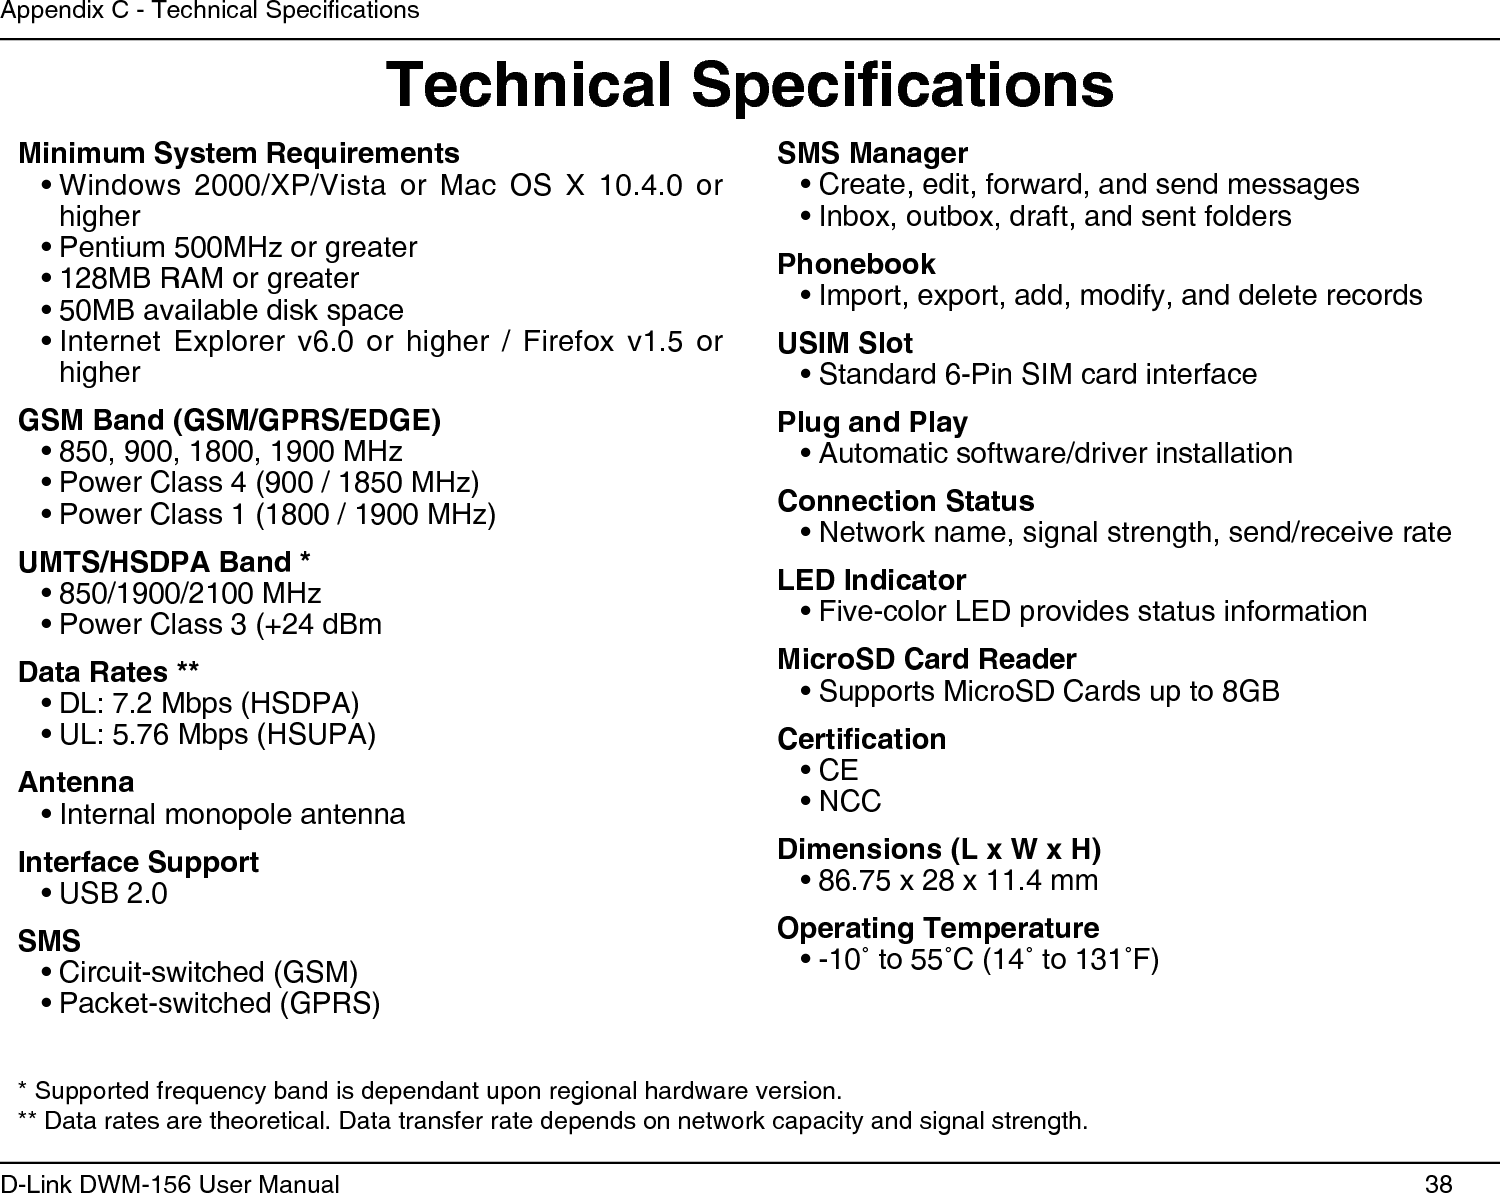 38D-Link DWM-156 User ManualAppendix C - Technical SpecicationsTechnical SpecicationsMinimum System RequirementsWindows  2000/XP/Vista  or  Mac  OS  X  10.4.0  or • higherPentium 500MHz or greater• 128MB RAM or greater• 50MB available disk space• Internet  Explorer  v6.0  or  higher  /  Firefox  v1.5  or • higherGSM Band (GSM/GPRS/EDGE)850, 900, 1800, 1900 MHz• Power Class 4 (900 / 1850 MHz)• Power Class 1 (1800 / 1900 MHz)• UMTS/HSDPA Band *850/1900/2100 MHz• Power Class 3 (+24 dBm• Data Rates **DL: 7.2 Mbps (HSDPA)• UL: 5.76 Mbps (HSUPA)• AntennaInternal monopole antenna• Interface SupportUSB 2.0• SMSCircuit-switched (GSM)• Packet-switched (GPRS)• SMS ManagerCreate, edit, forward, and send messages• Inbox, outbox, draft, and sent folders• PhonebookImport, export, add, modify, and delete records• USIM SlotStandard 6-Pin SIM card interface• Plug and PlayAutomatic software/driver installation• Connection StatusNetwork name, signal strength, send/receive rate• LED IndicatorFive-color LED provides status information• MicroSD Card ReaderSupports MicroSD Cards up to 8GB• CerticationCE• NCC• Dimensions (L x W x H)86.75 x 28 x 11.4 mm• Operating Temperature-10˚ to 55˚C (14˚ to 131˚F)• * Supported frequency band is dependant upon regional hardware version.** Data rates are theoretical. Data transfer rate depends on network capacity and signal strength.